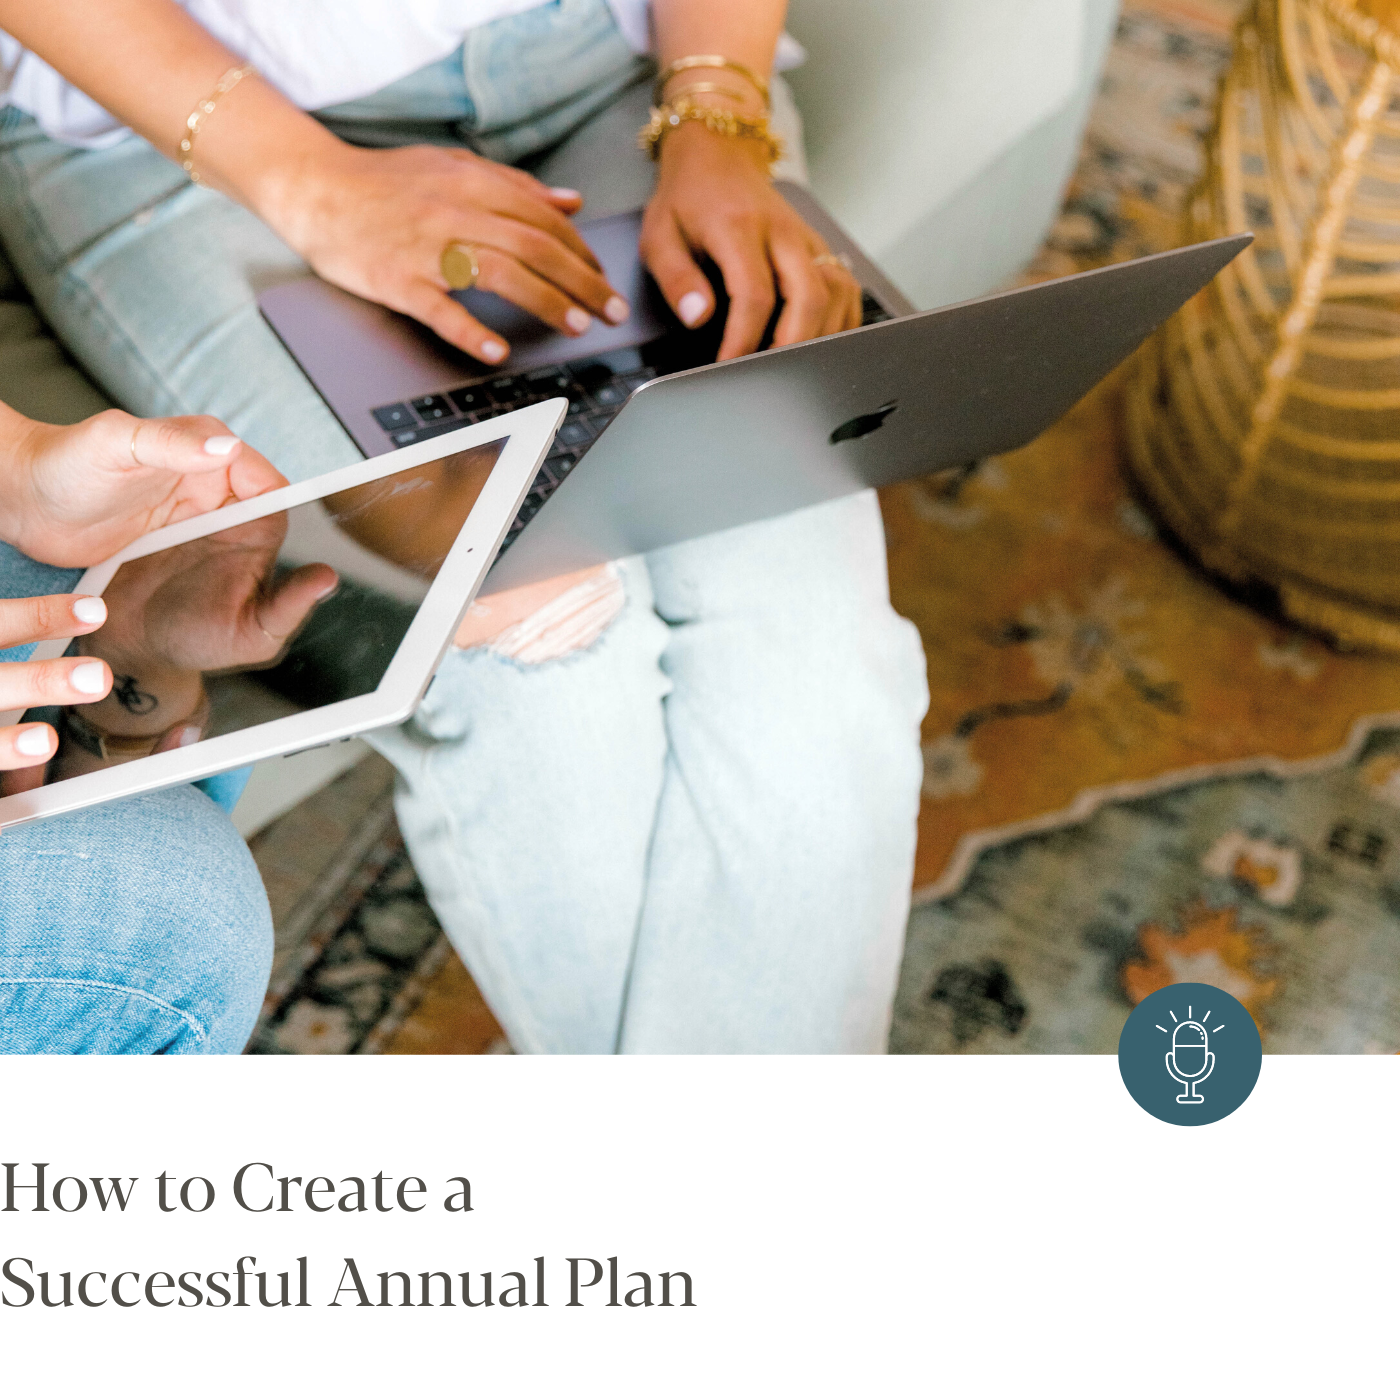 Episode #264 - How to Create a Successful Annual Plan